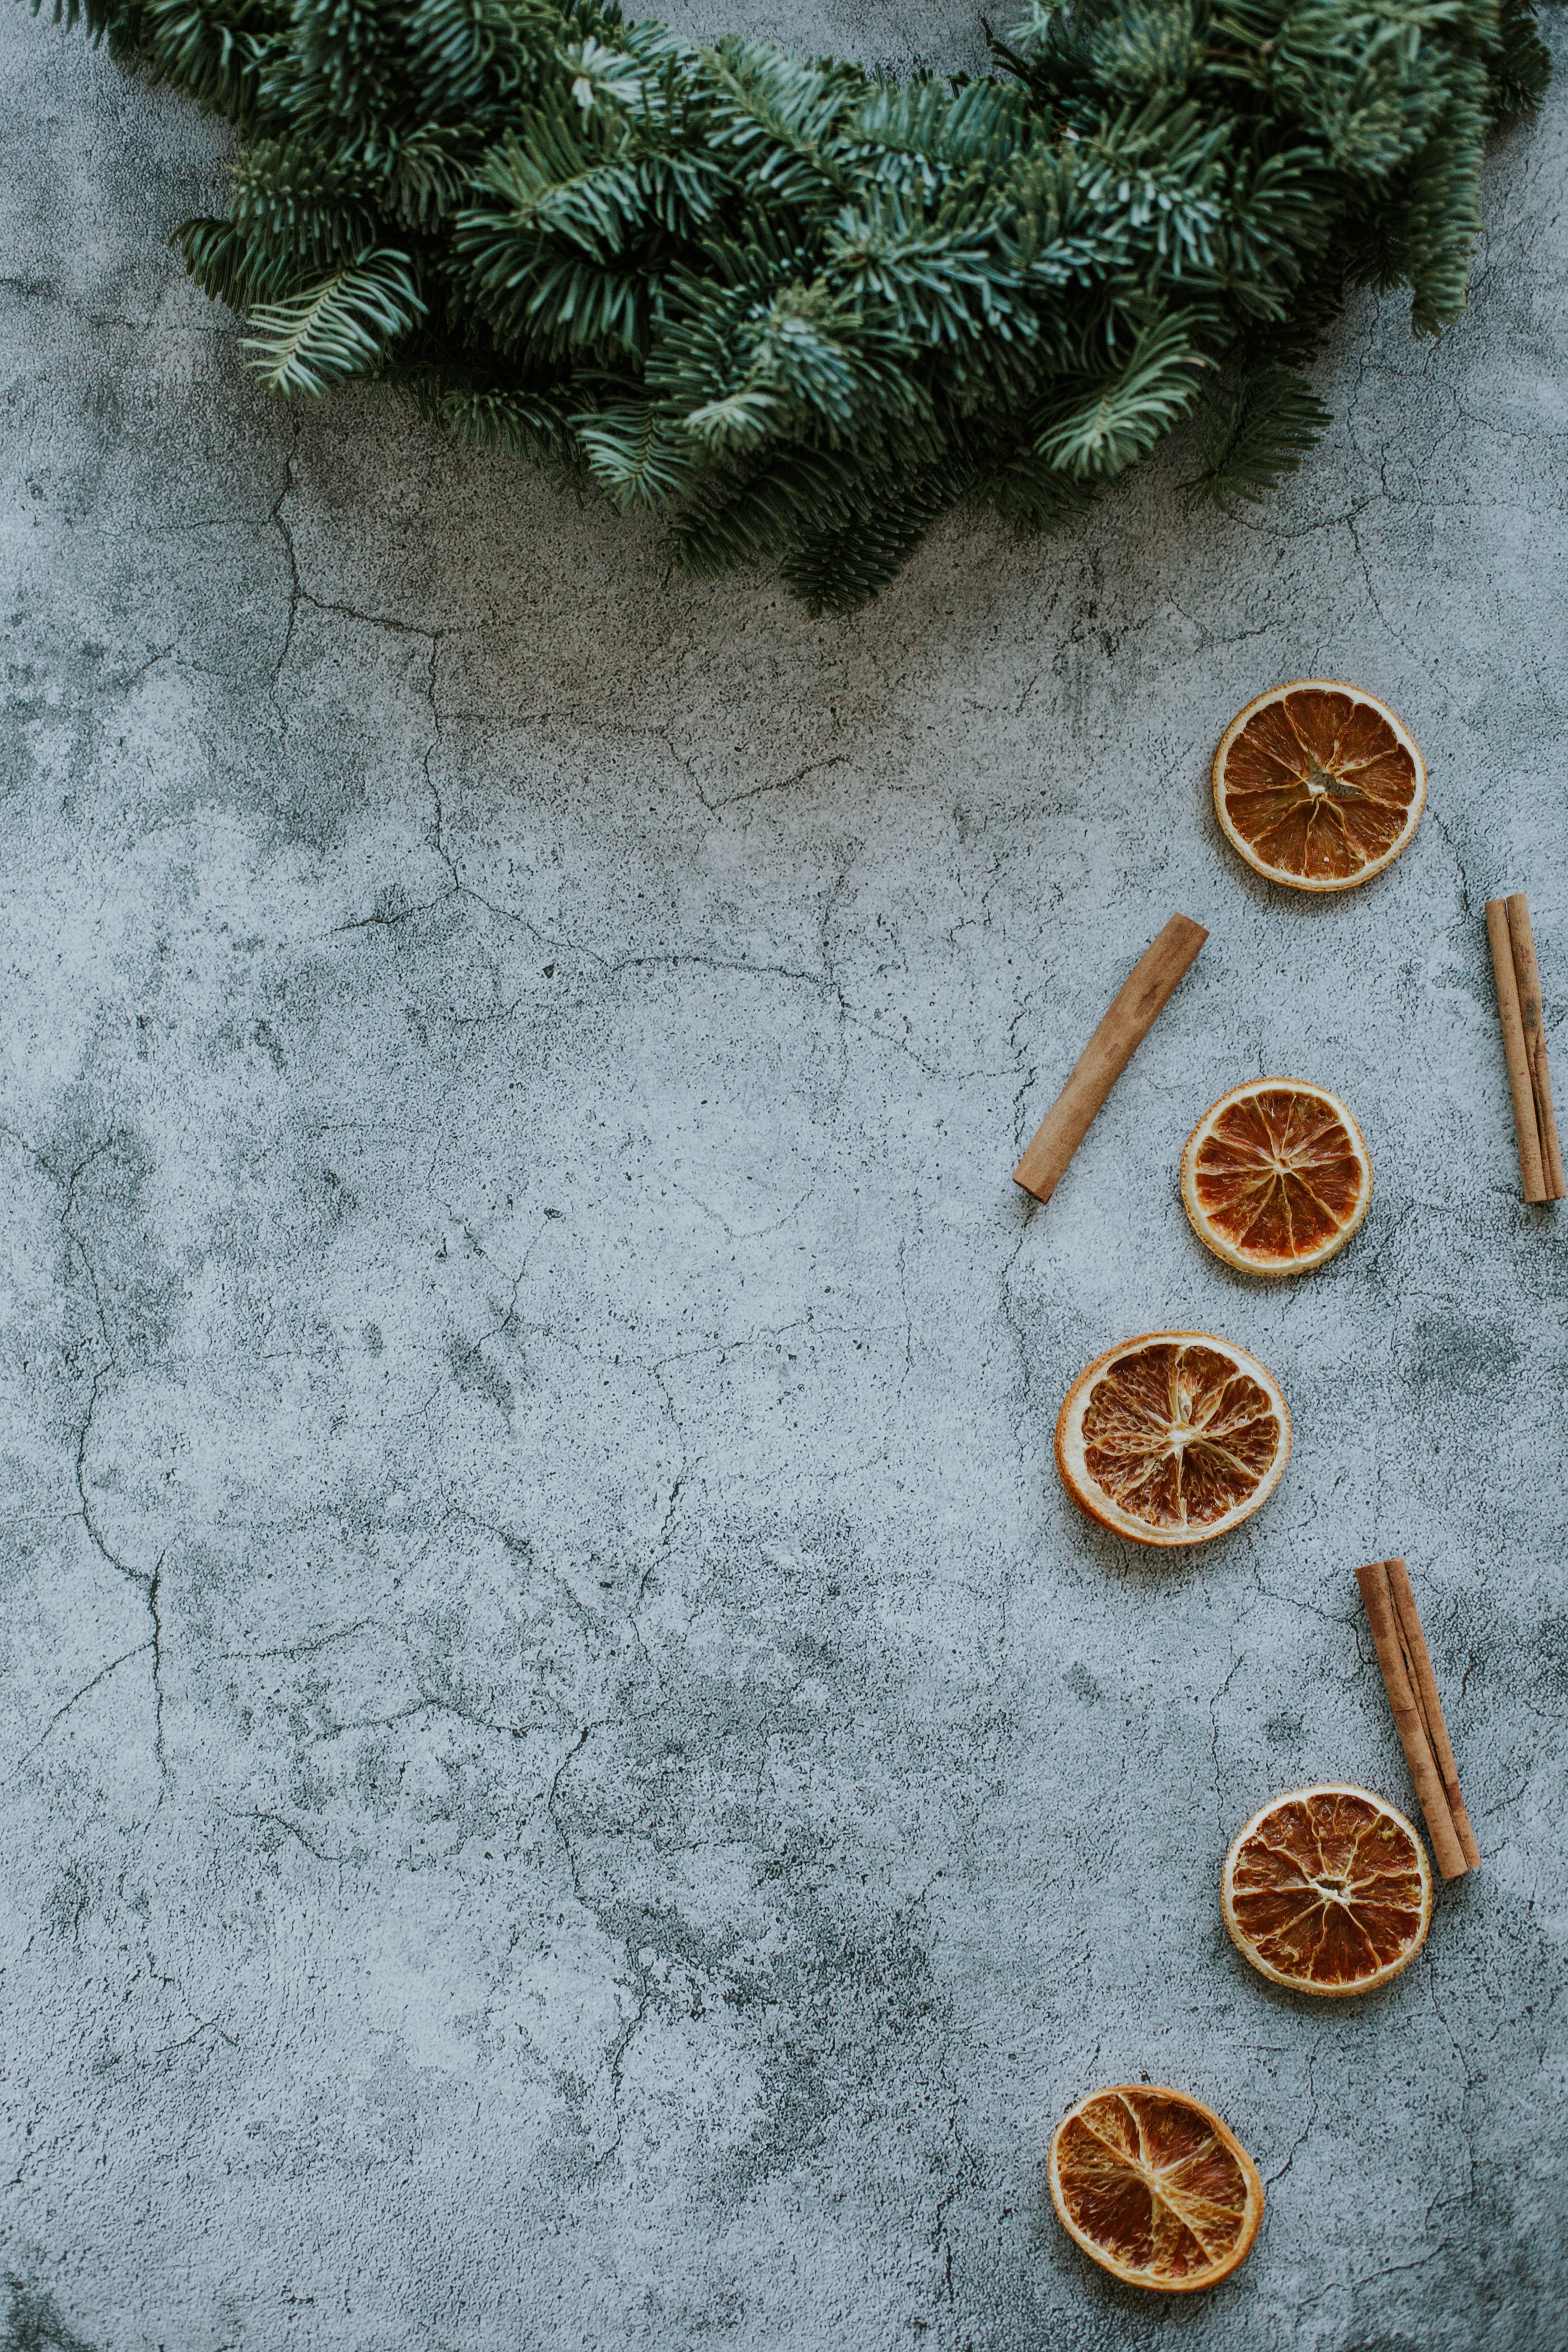 71736 free download Orange wallpapers for phone,  Orange images and screensavers for mobile